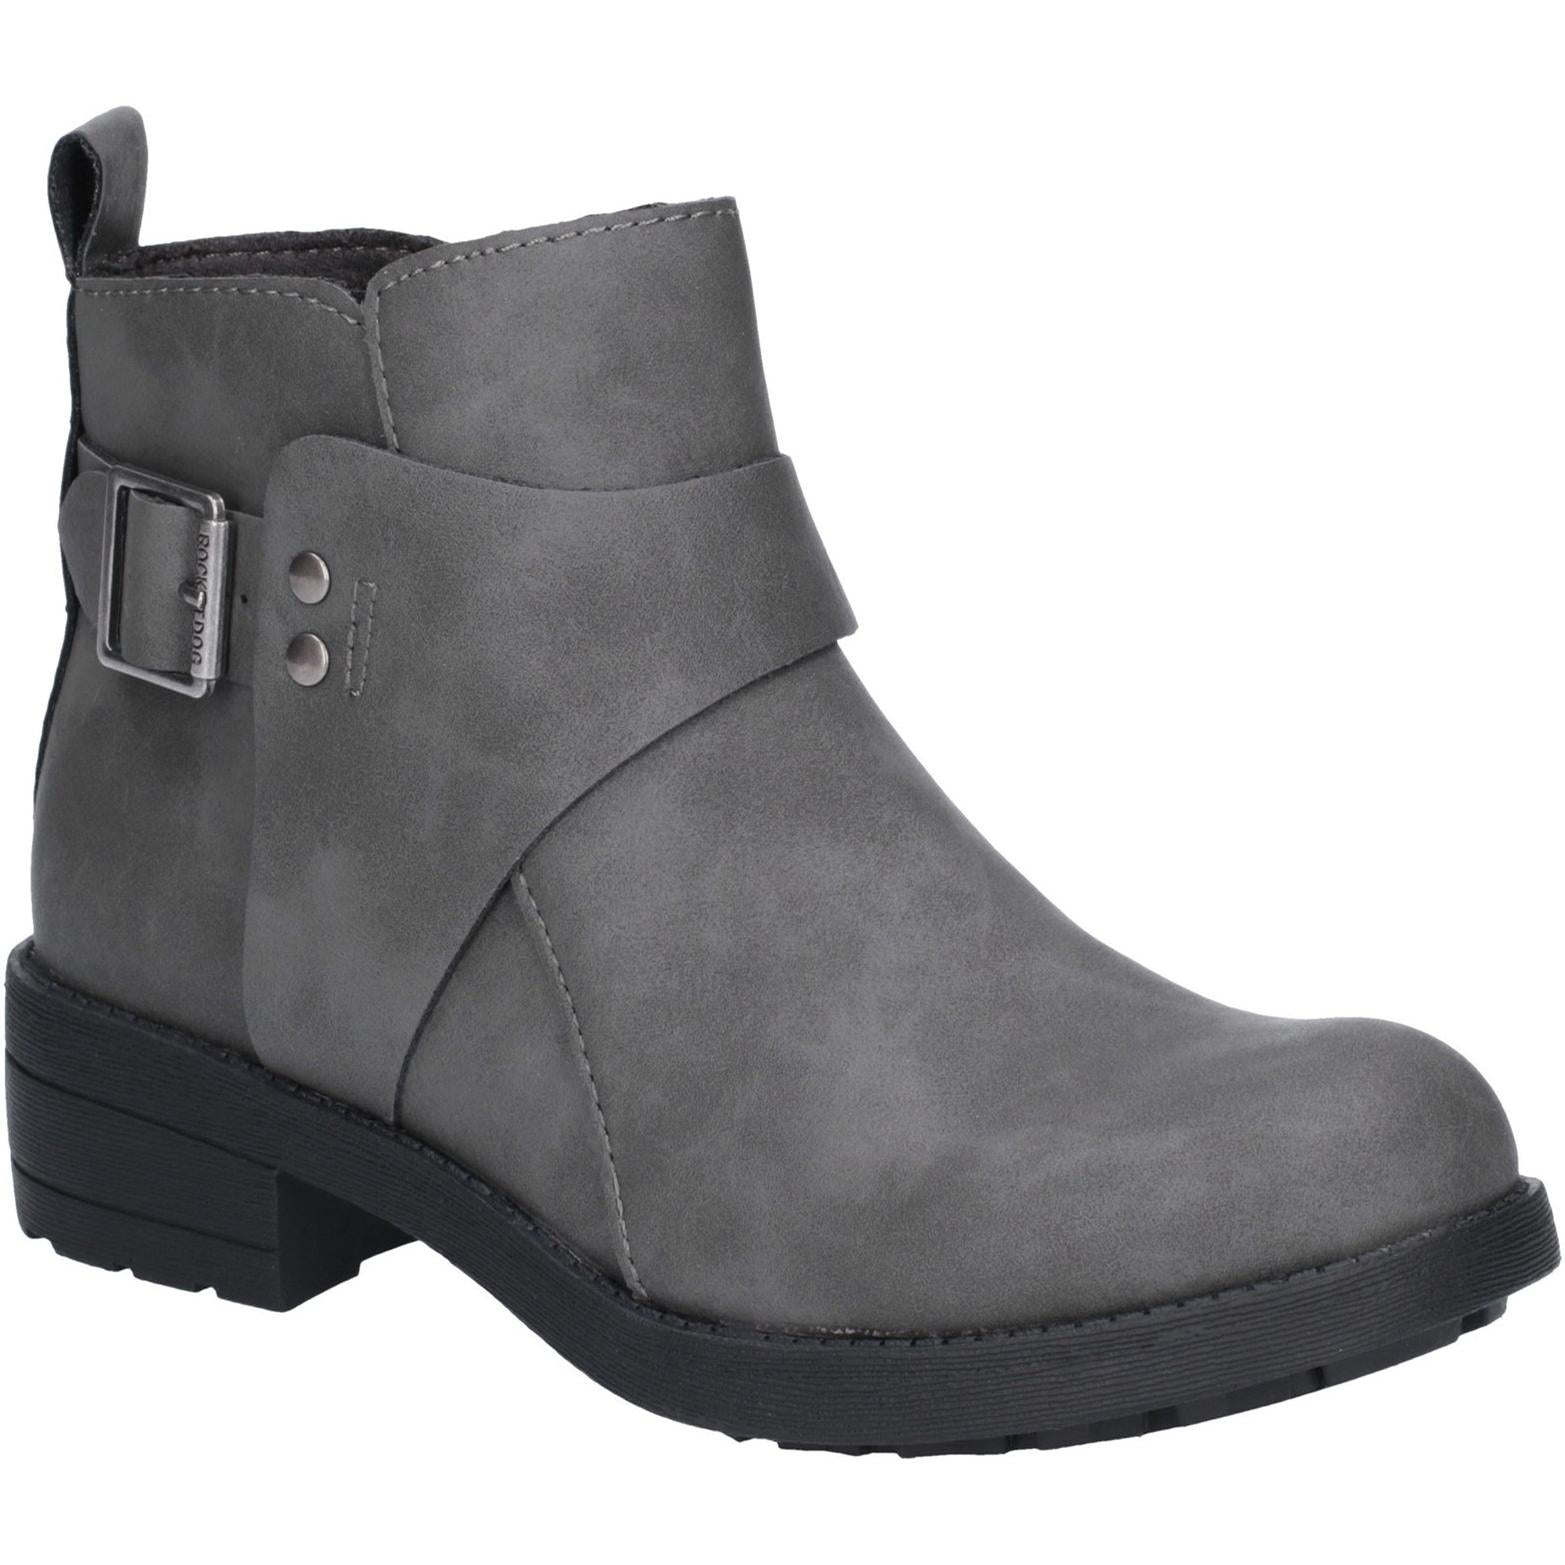 Rocket Dog Turia Ankle Boot